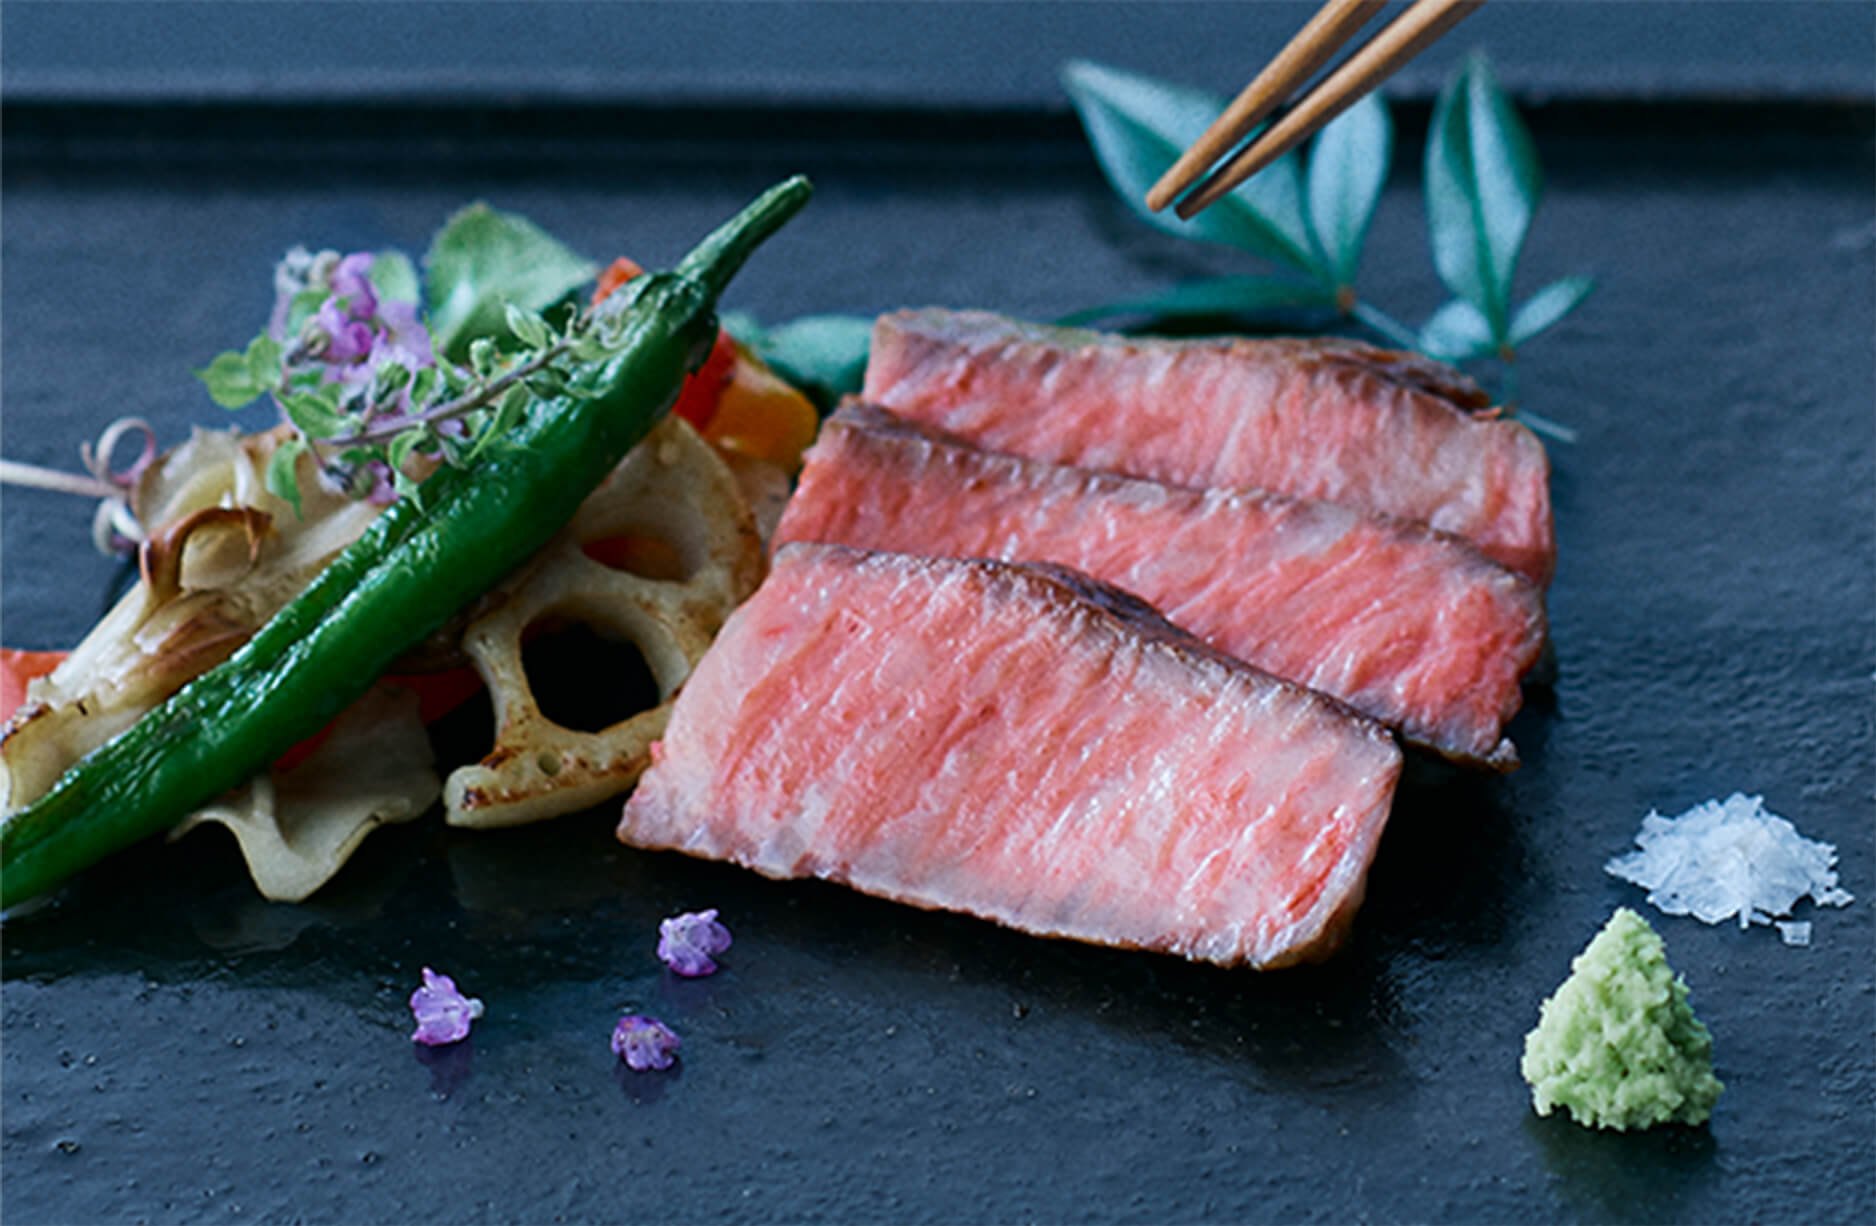 Japanese Wagyu beef, representative of Japanese food culture